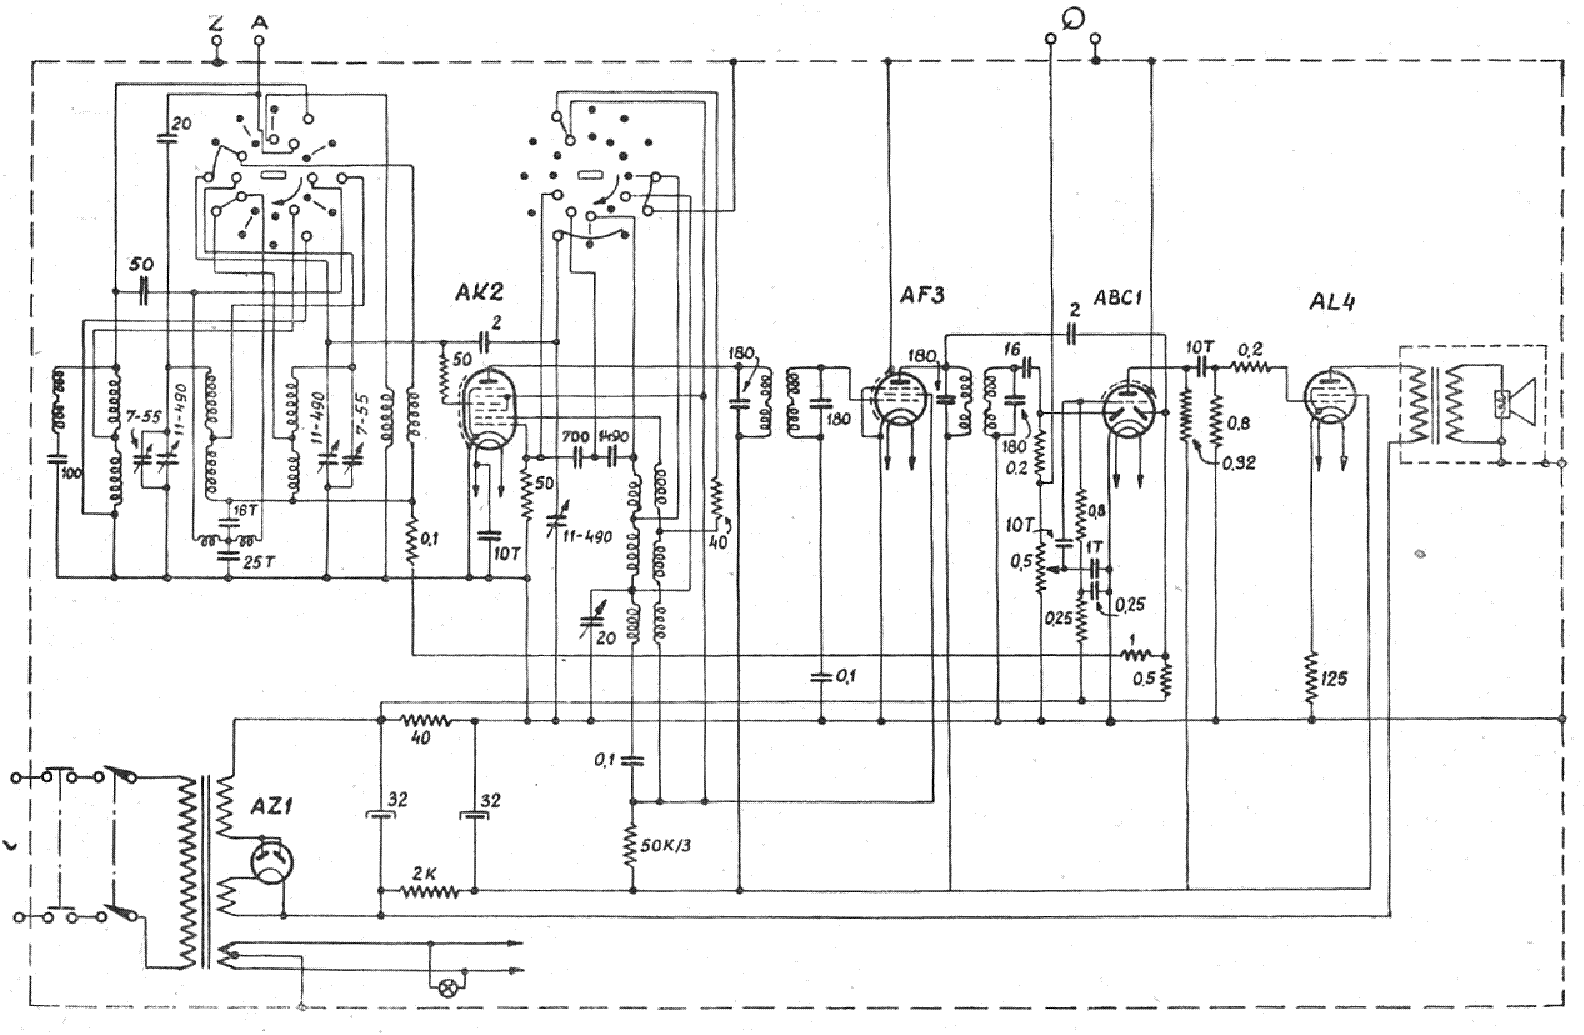 PHILIPS PIONIER service manual (1st page)